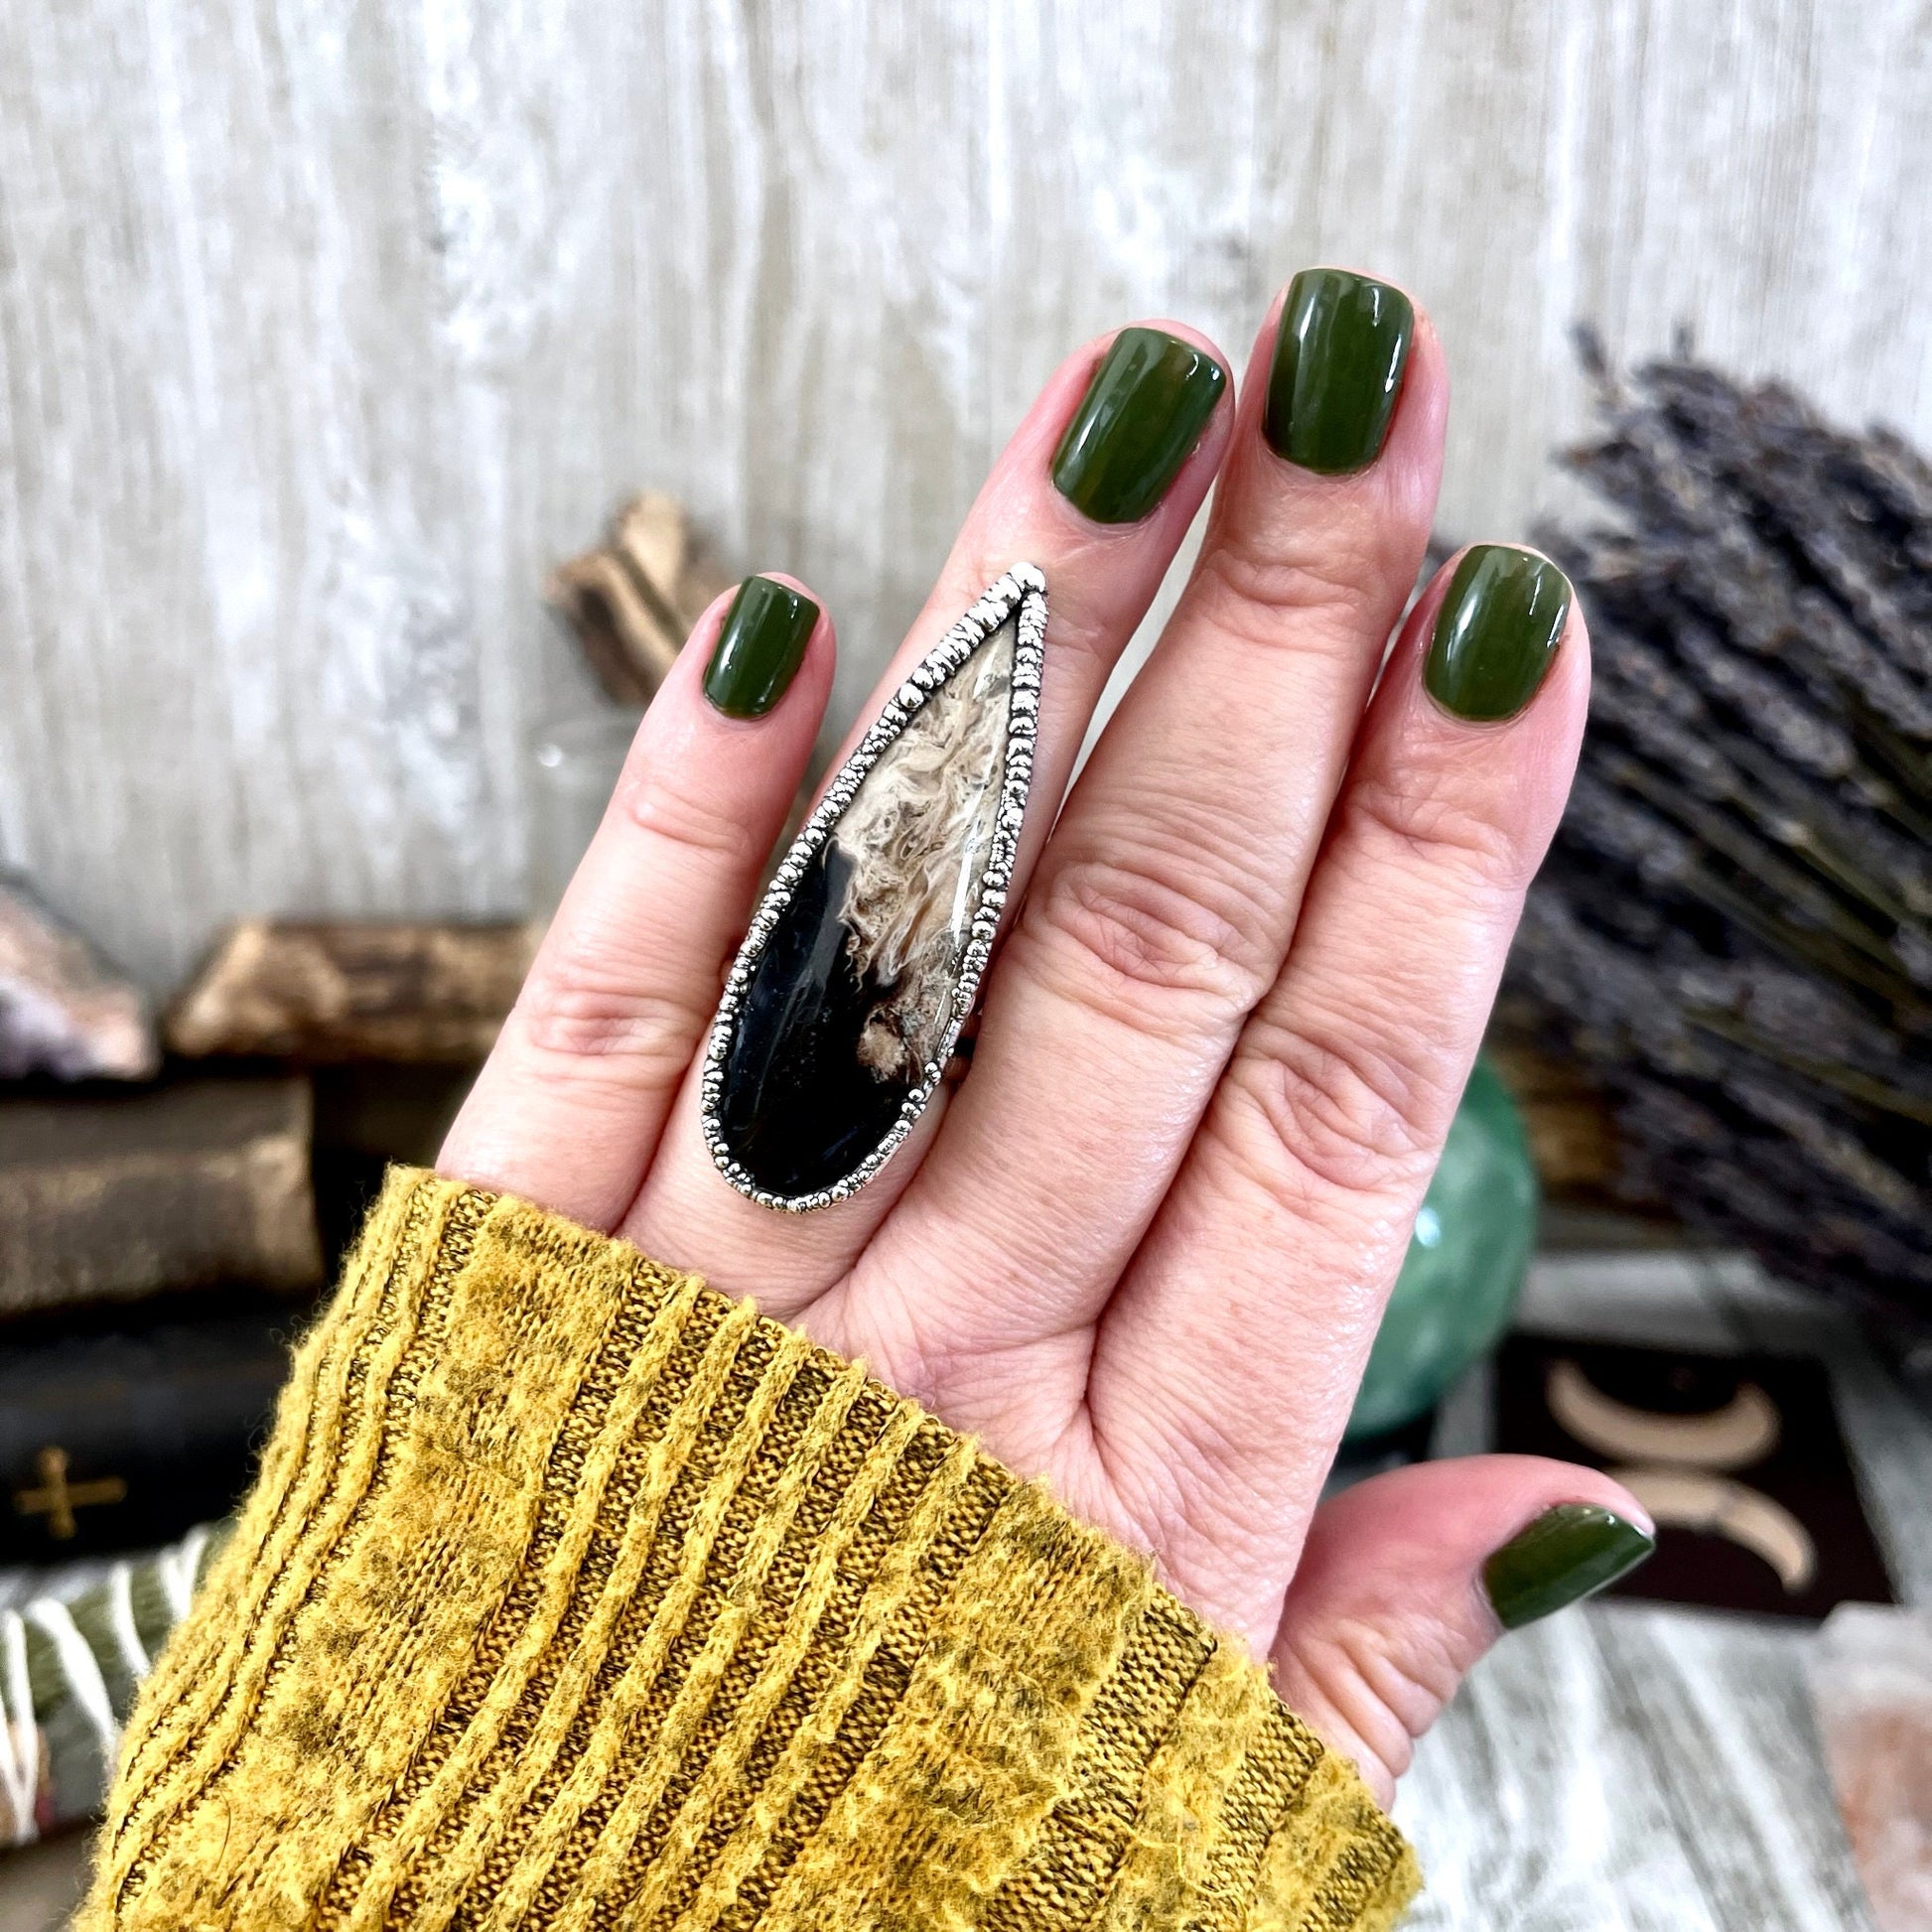 Unique Size 7 Large Fossilized Palm Root Statement Ring in Fine Silver / Foxlark Collection - One of a Kind - Foxlark Crystal Jewelry